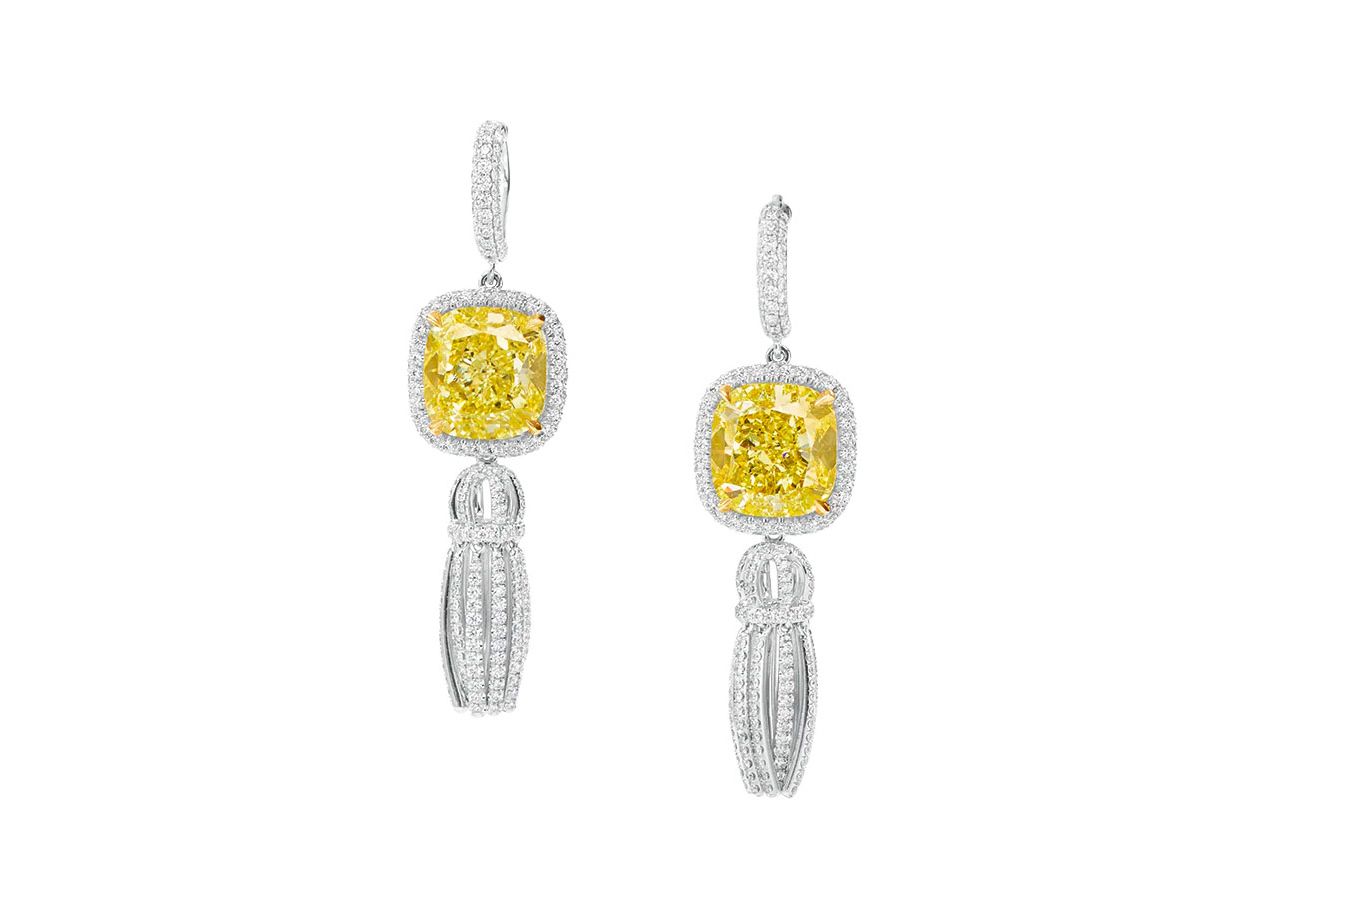 Stephen Silver drop earrings with canary yellow diamonds